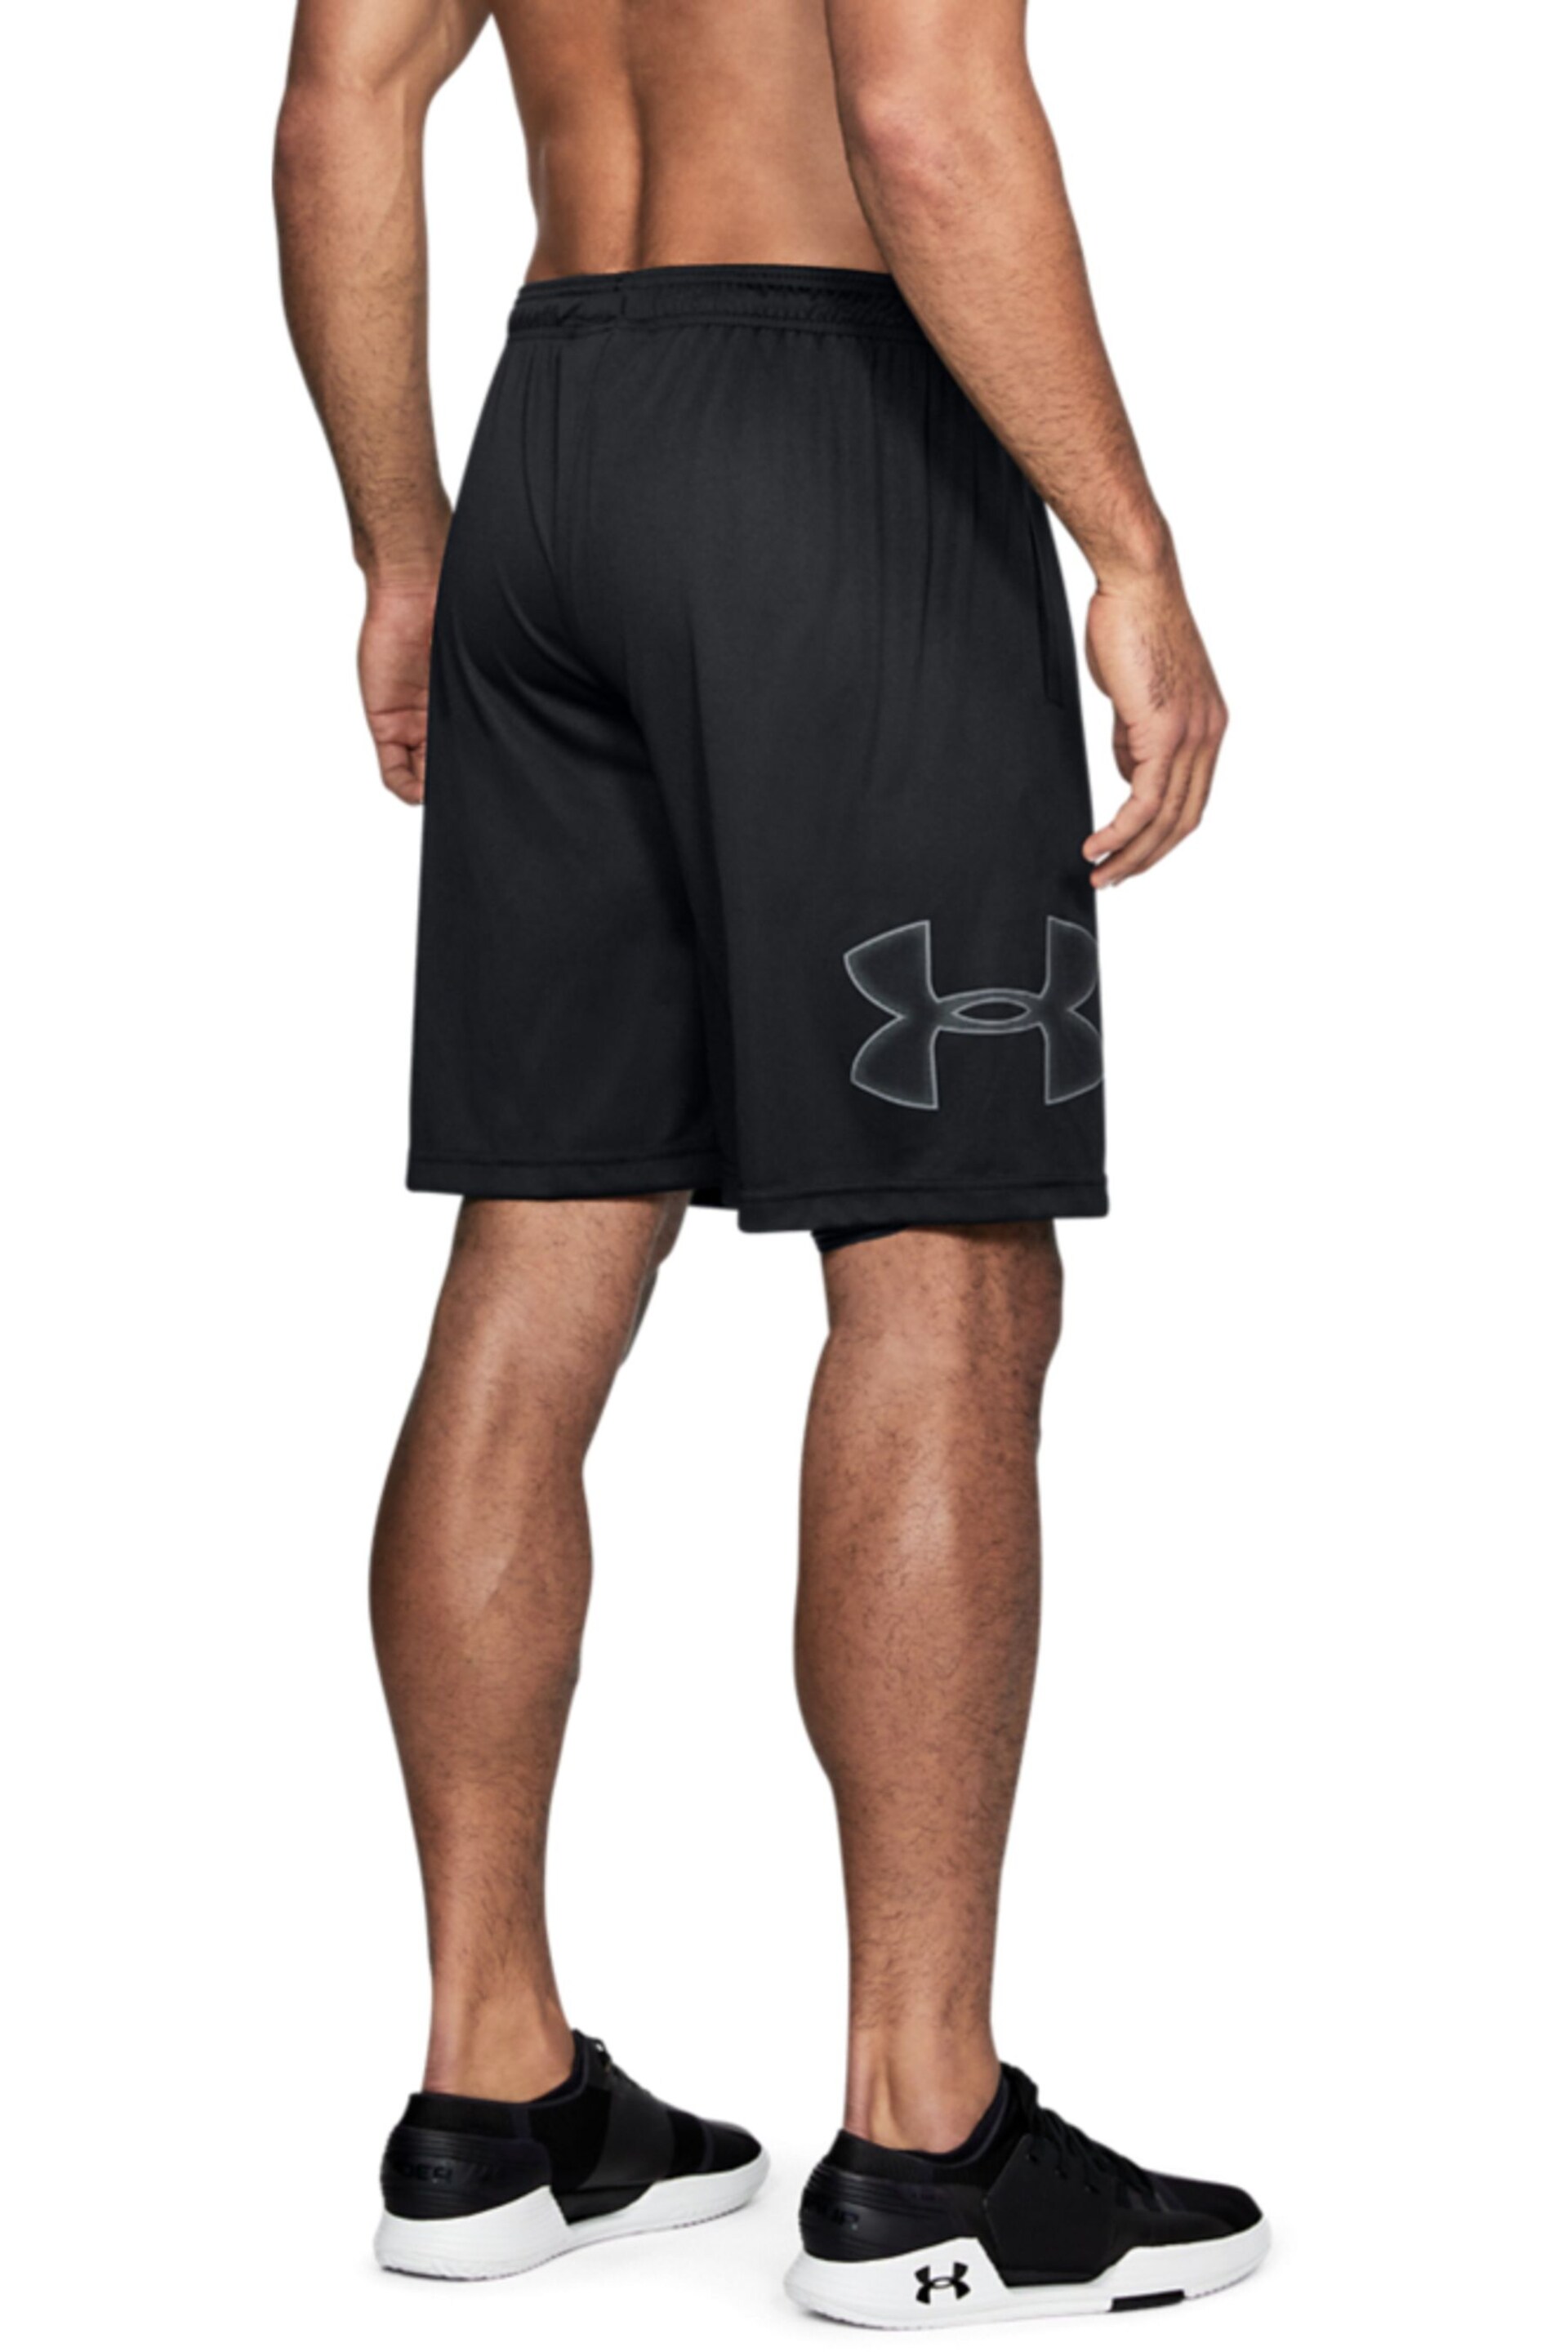 Under Armour Black Tech Graphic Shorts - Image 4 of 6